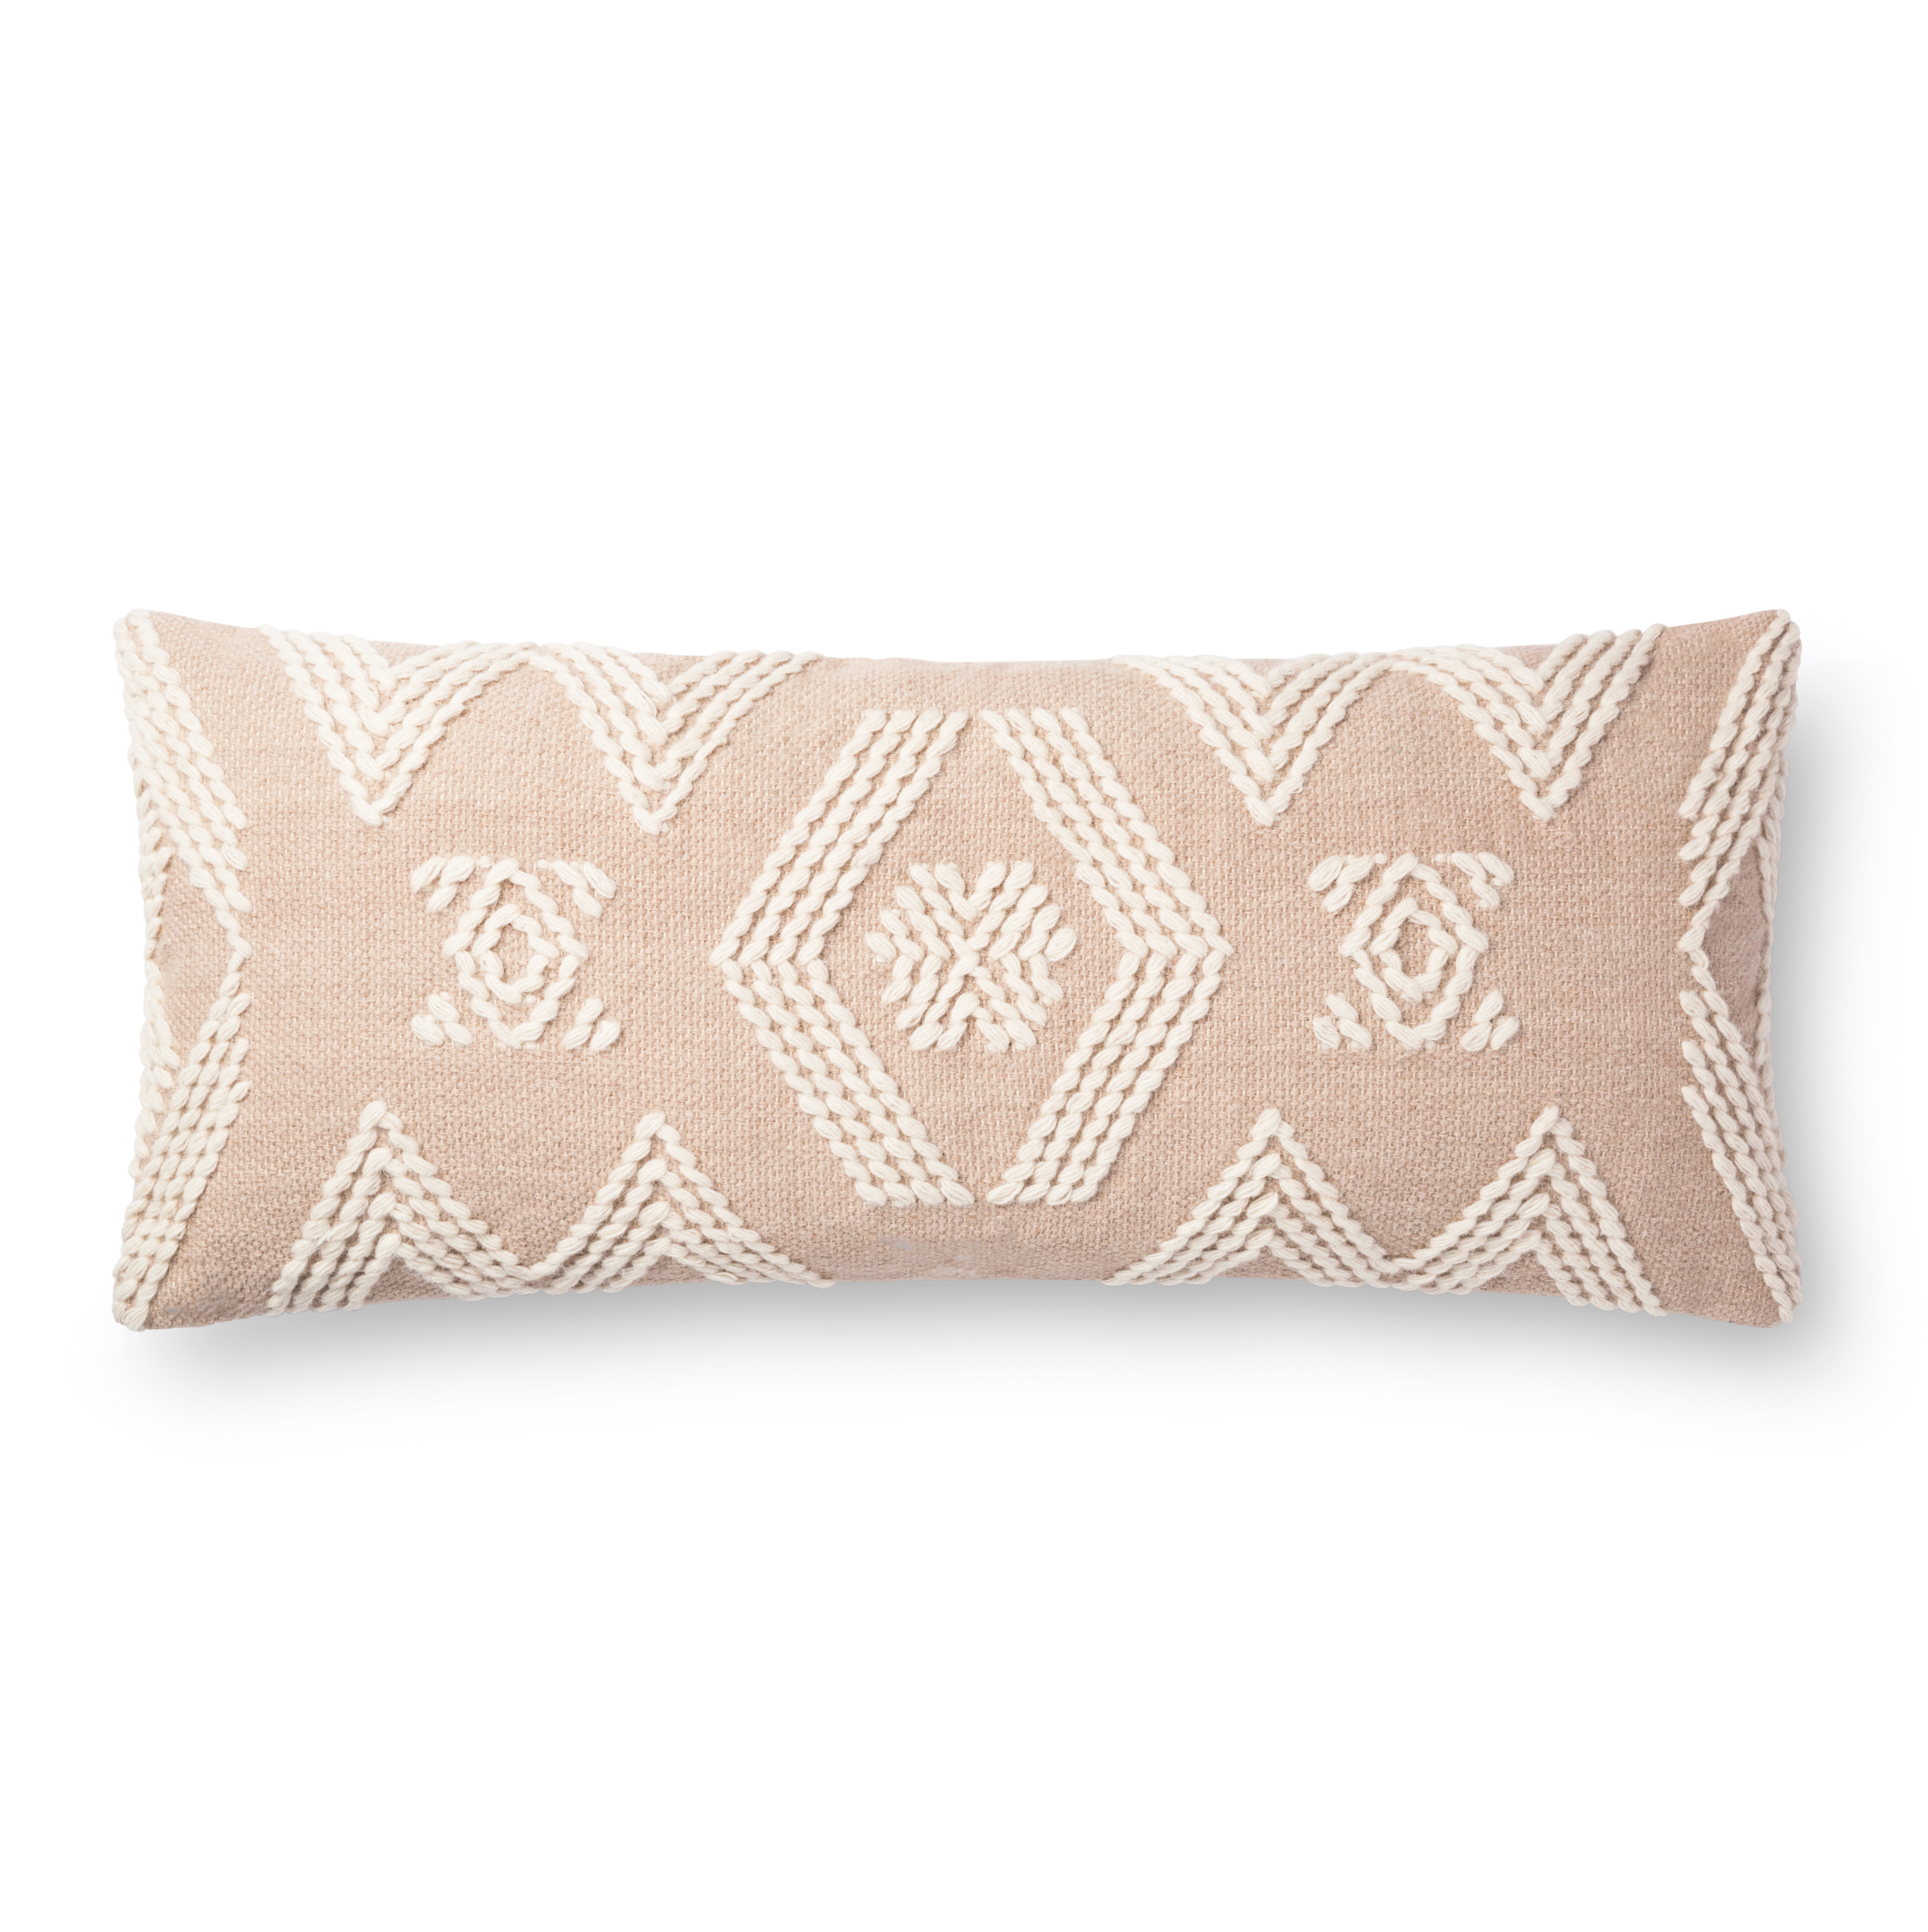 PILLOWS P1105 SAND / IVORY 13" x 35" Cover w/Poly - Magnolia Home by Joana Gaines Crafted by Loloi Rugs